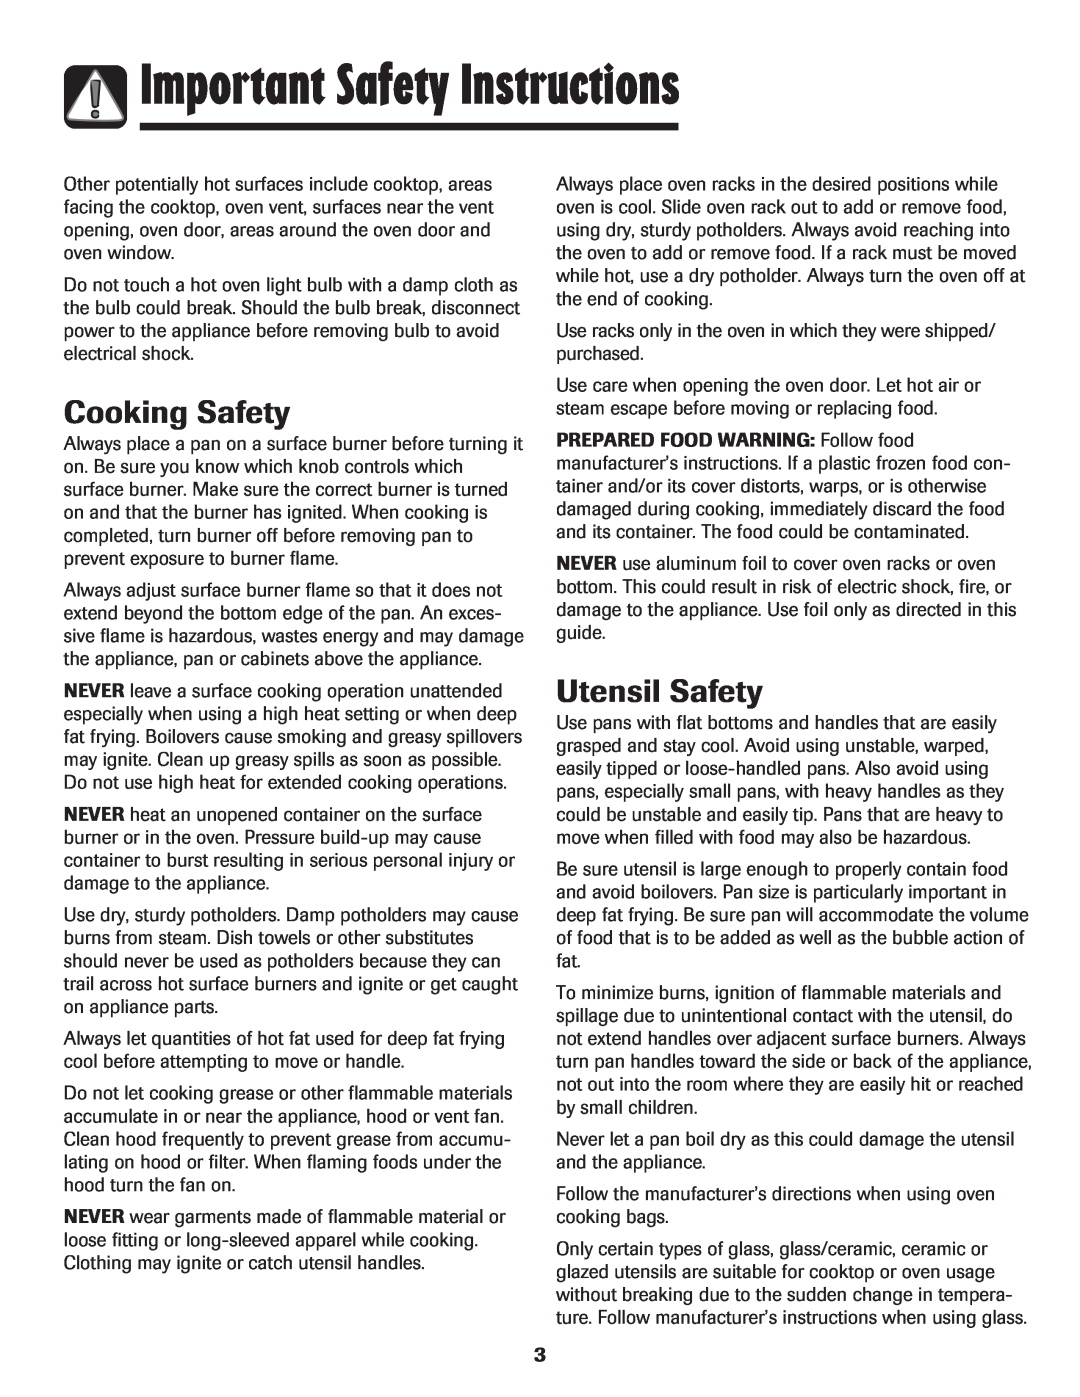 Maytag 8113P424-60 manual Cooking Safety, Utensil Safety, Important Safety Instructions 